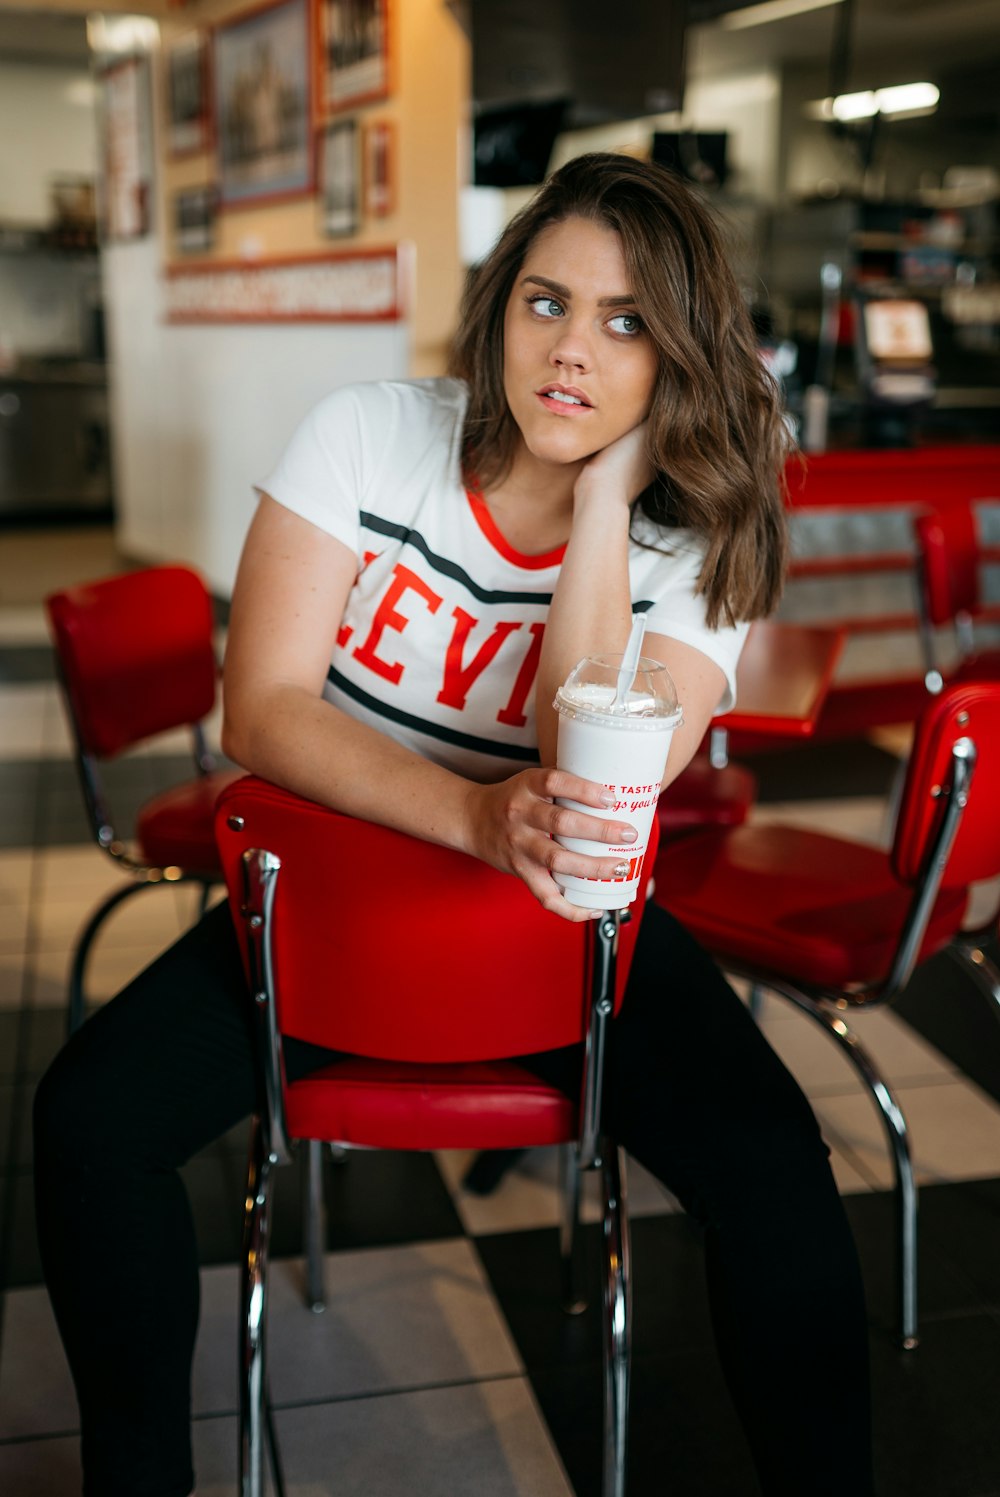 woman in white t-shirt sitting on chair holding white disposable cup